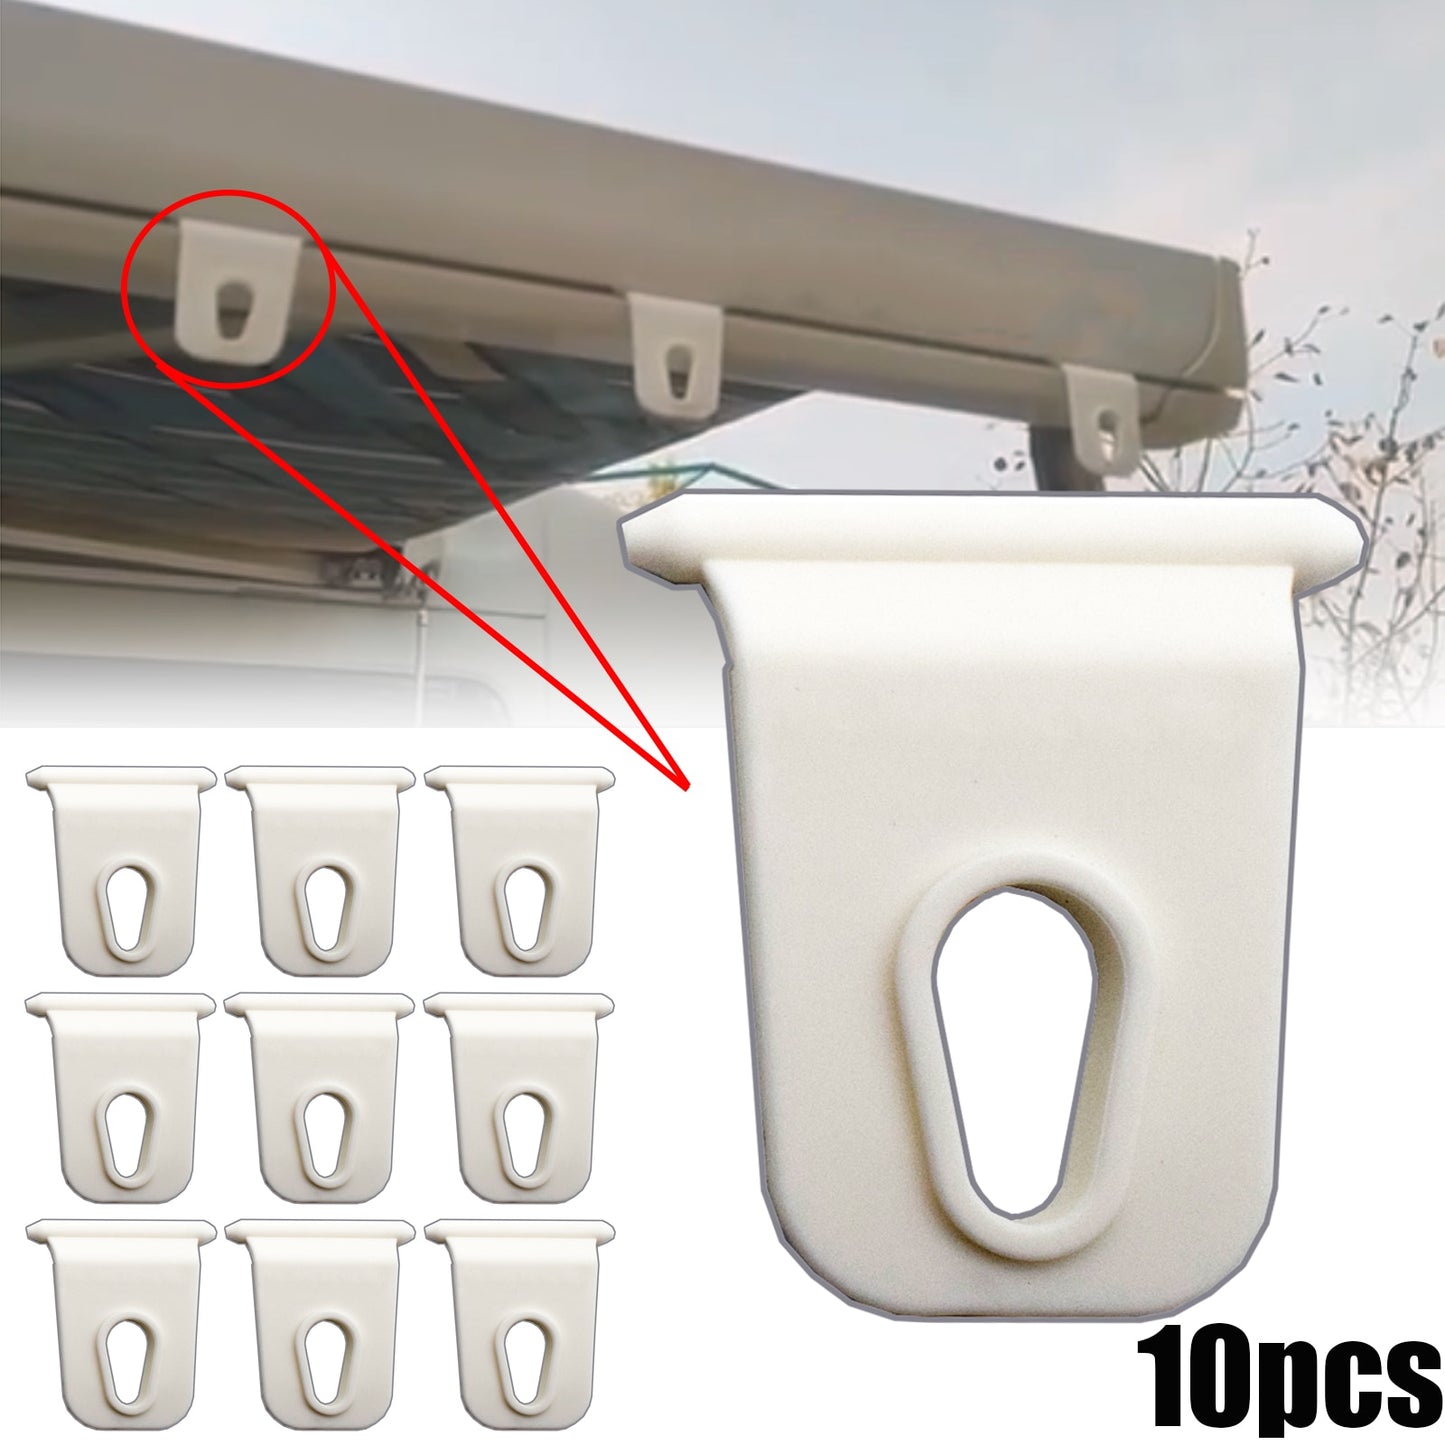 10X Universal White RV Awning Hook Hanging Clothes Party Light Holder For Caravan Camper Outdoor Camping survival Hiking Travel